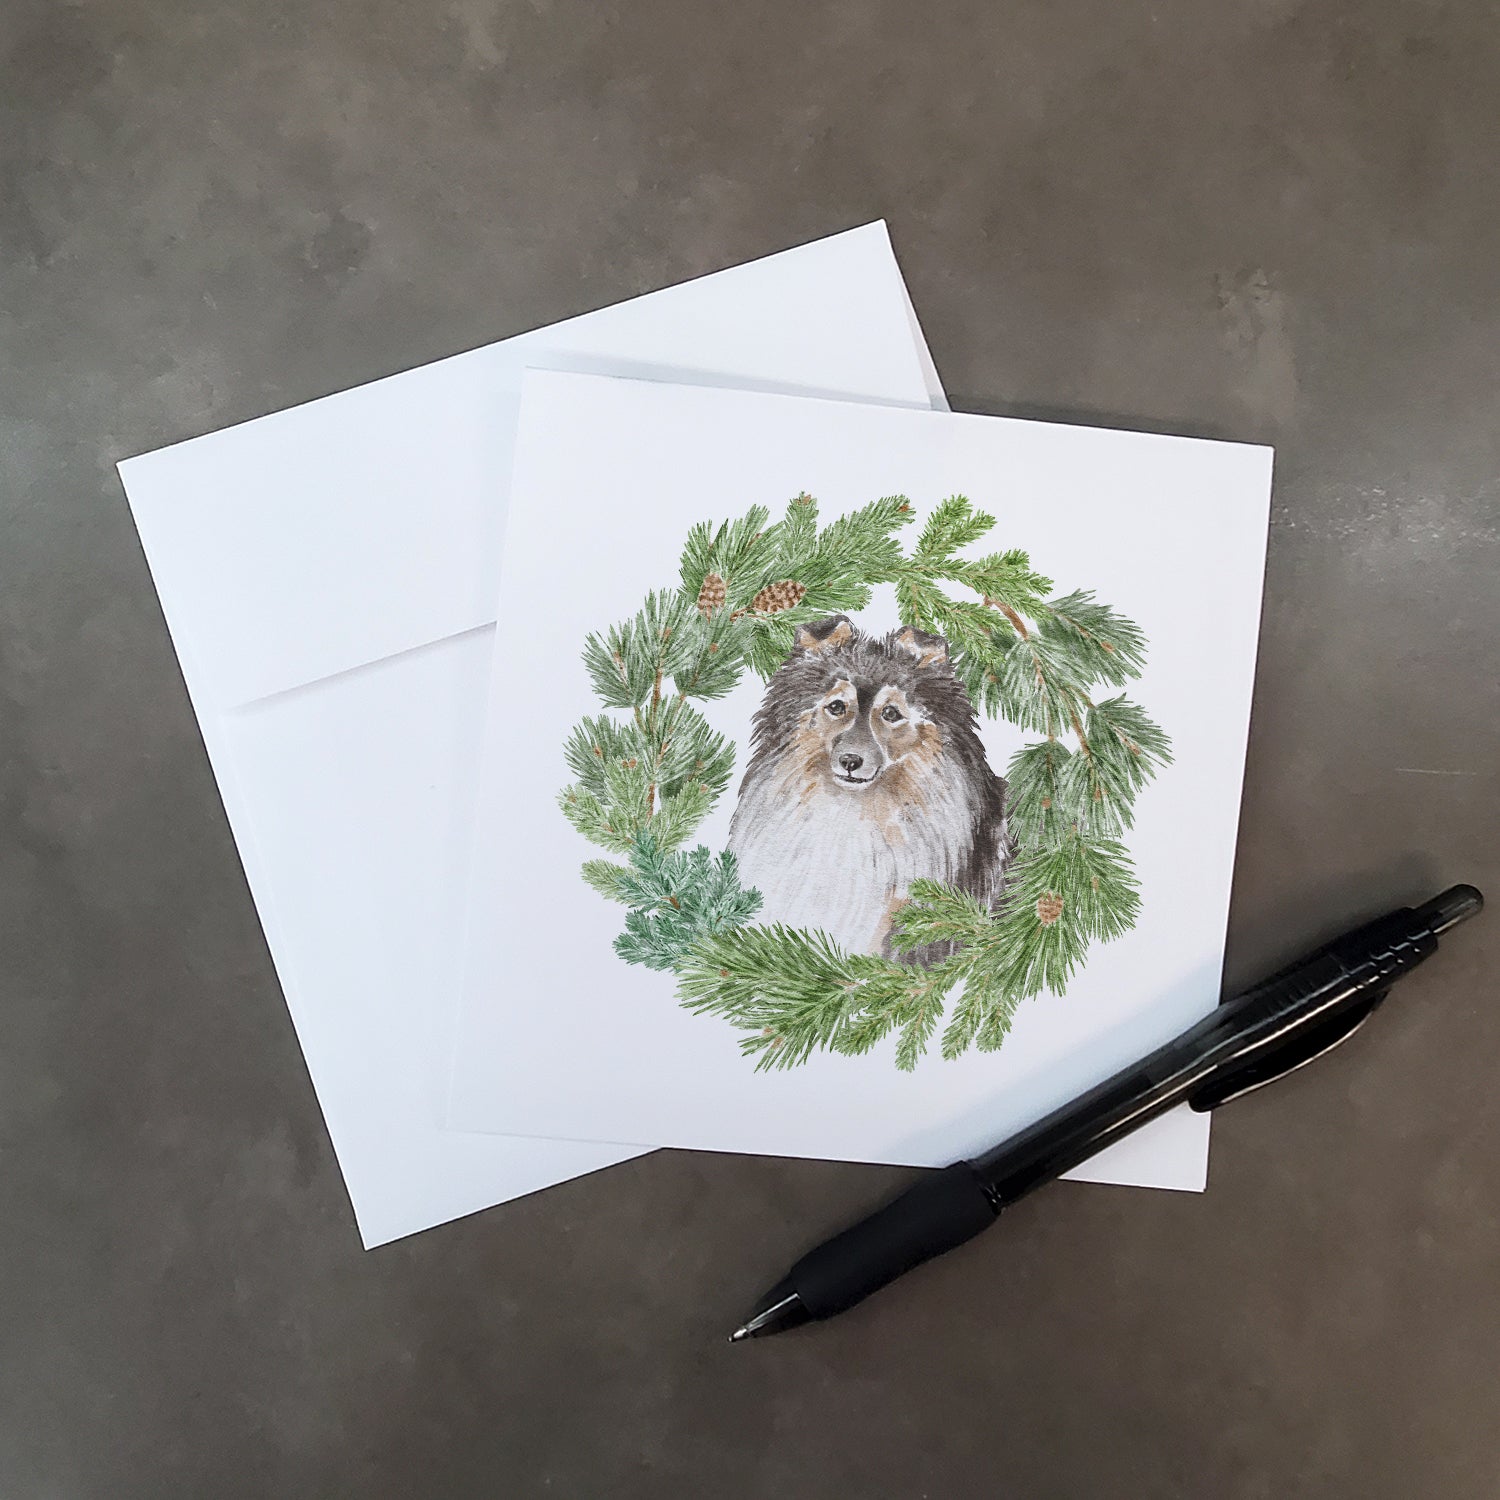 Sheltie/Shetland Sheepdog Tricolor Smiling #2 with Christmas Wreath Square Greeting Cards and Envelopes Pack of 8 - the-store.com